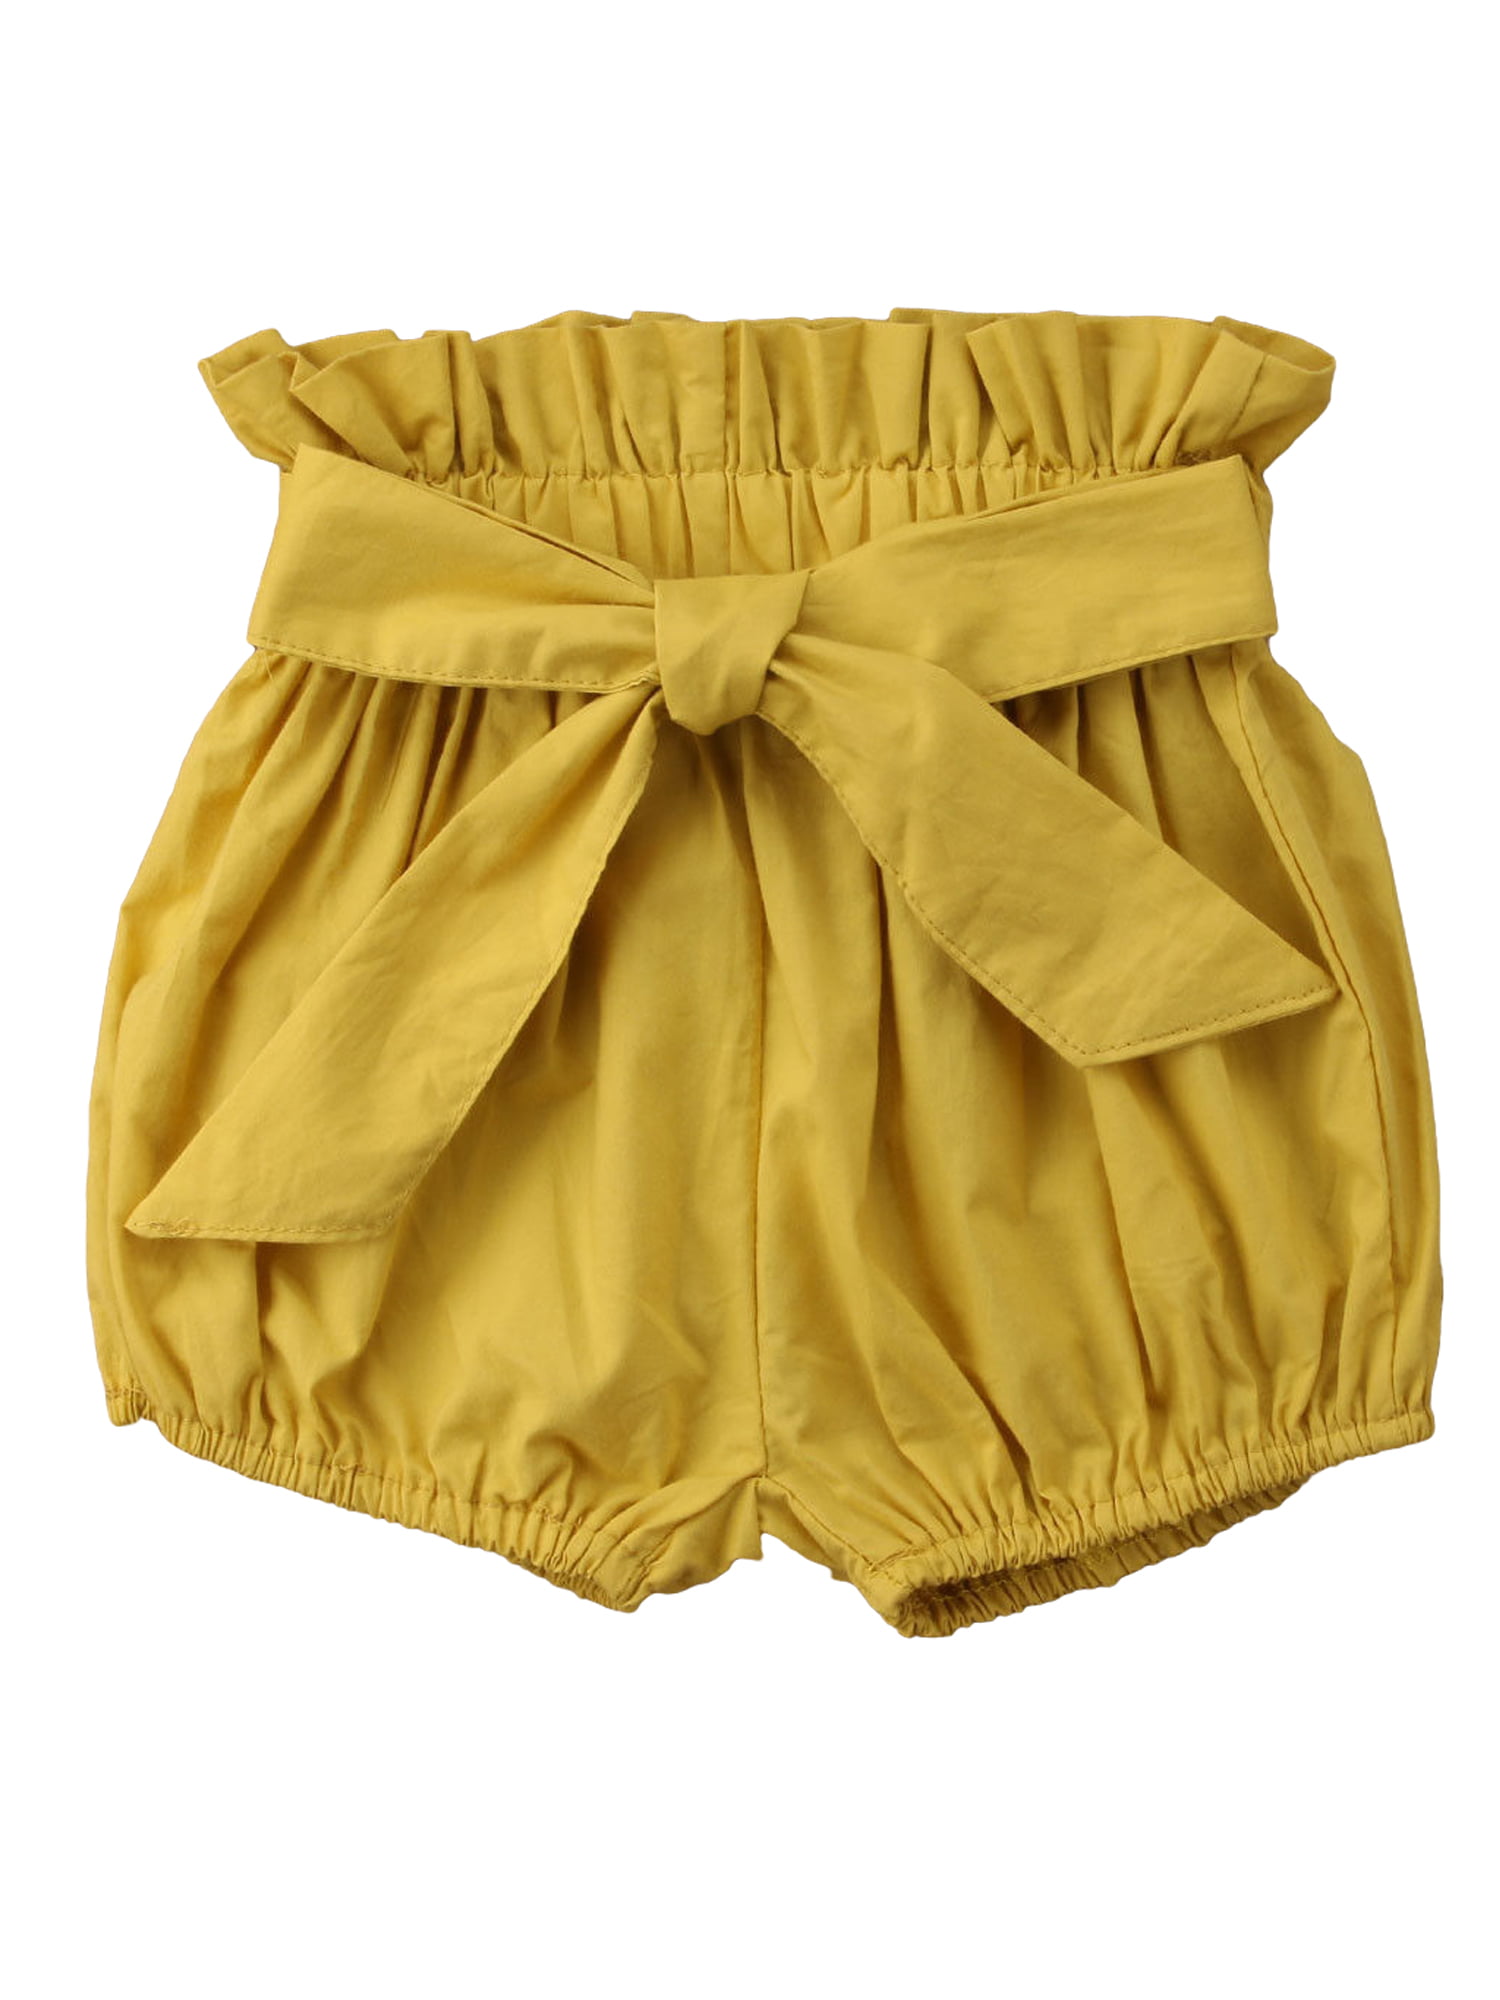 Details about   Baby Girls Boys PP Pants Shorts Bottoms Toddler Shorts Bloomers Panties Clothes 